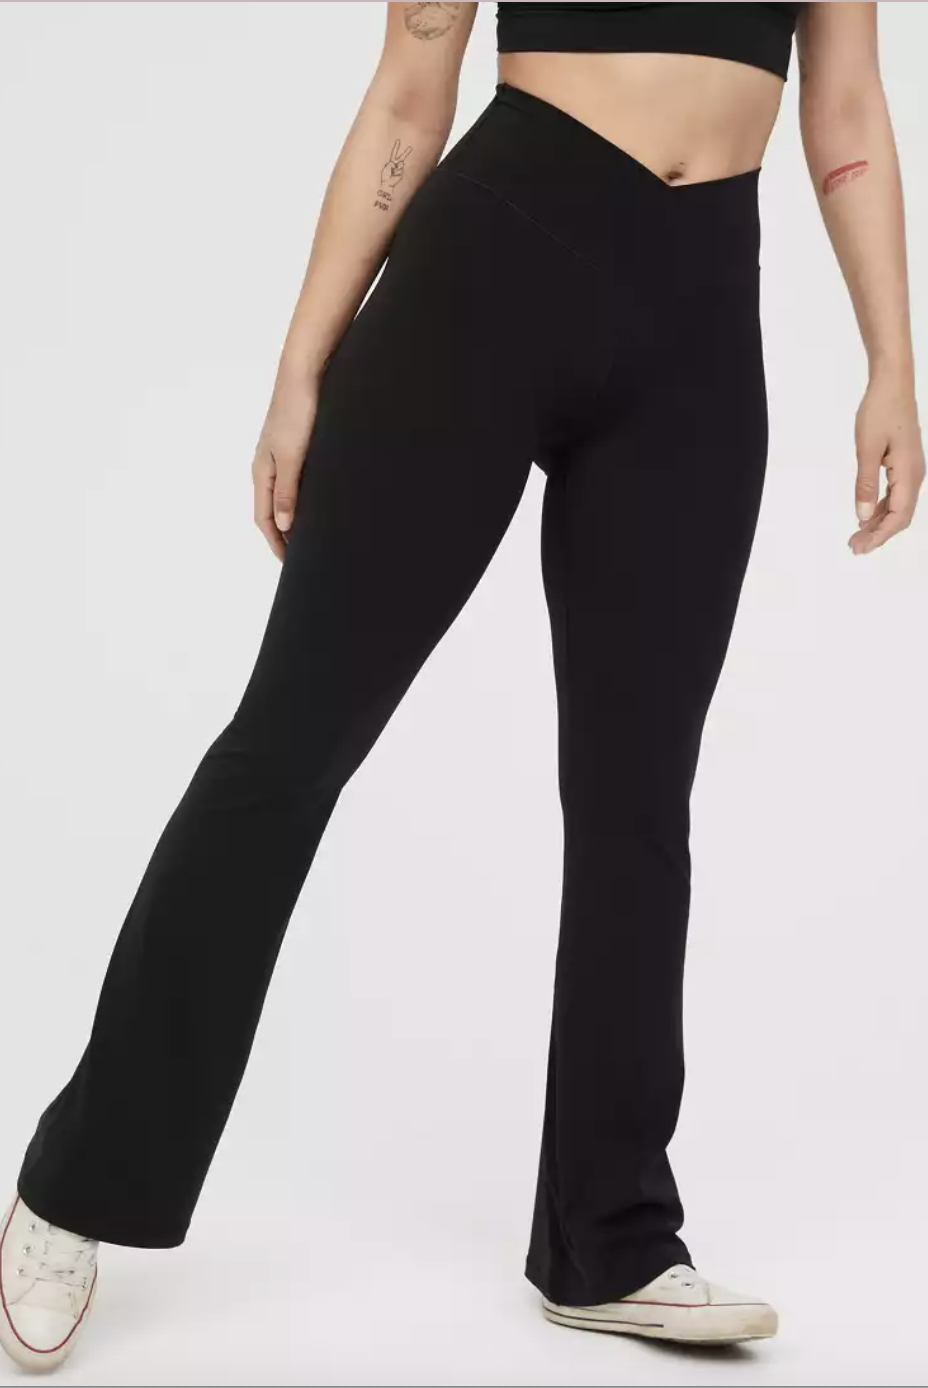 Real Me High Waisted Crossover Flare Legging